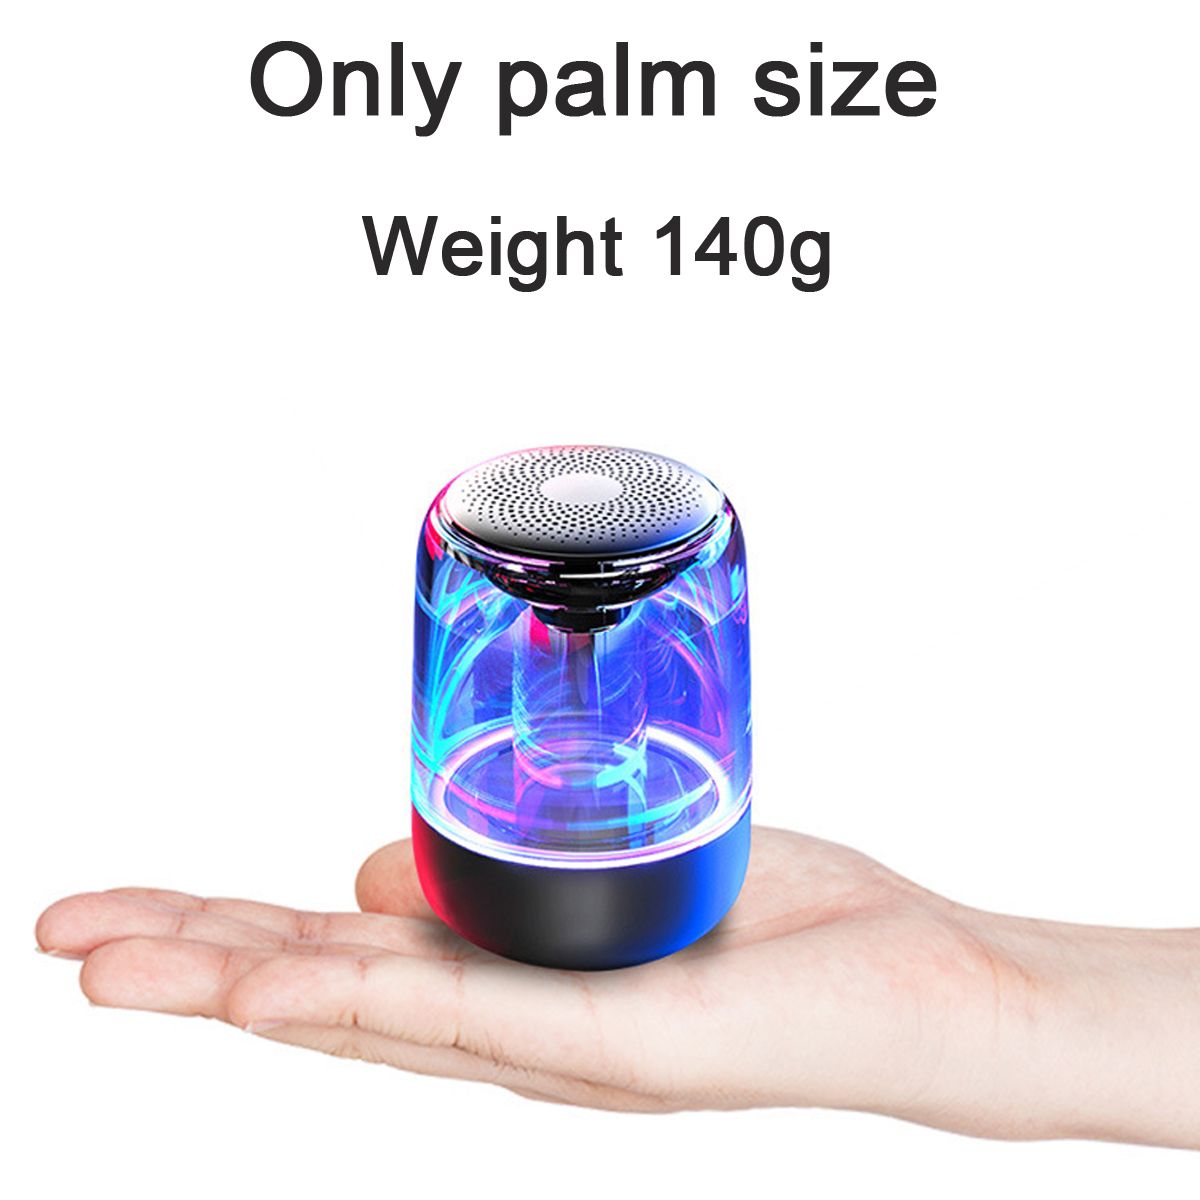 Wireless-bluetooth-True-Wireless-Stereo-Speaker-Colorful-LED-Light-Heavy-Bass-Speaker-with-Transpare-1529391